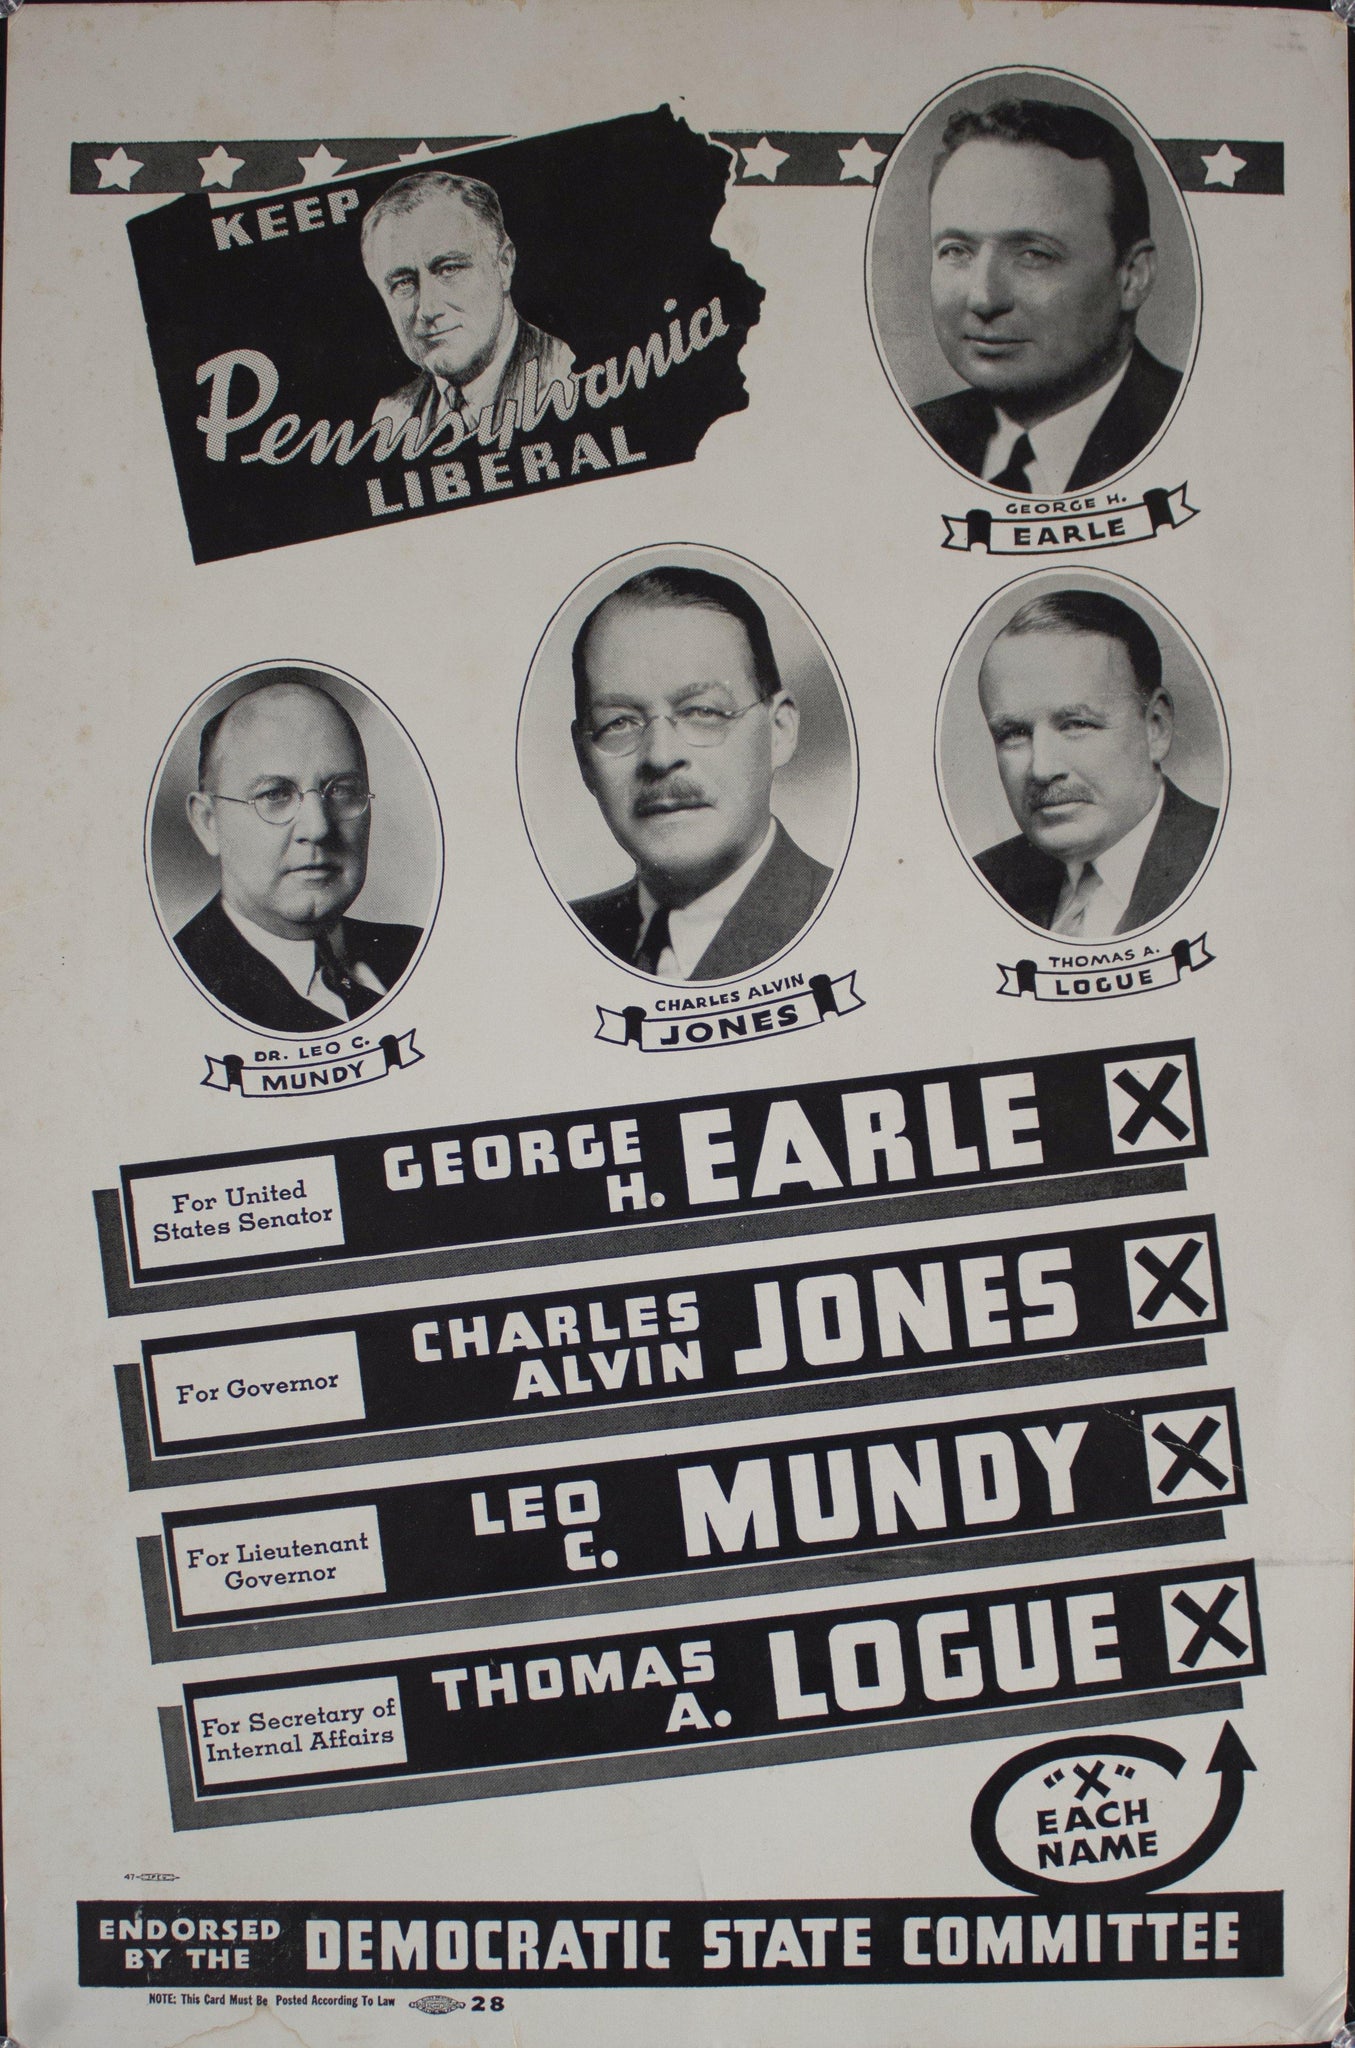 1938 Keep Pennsylvania Liberal - Golden Age Posters